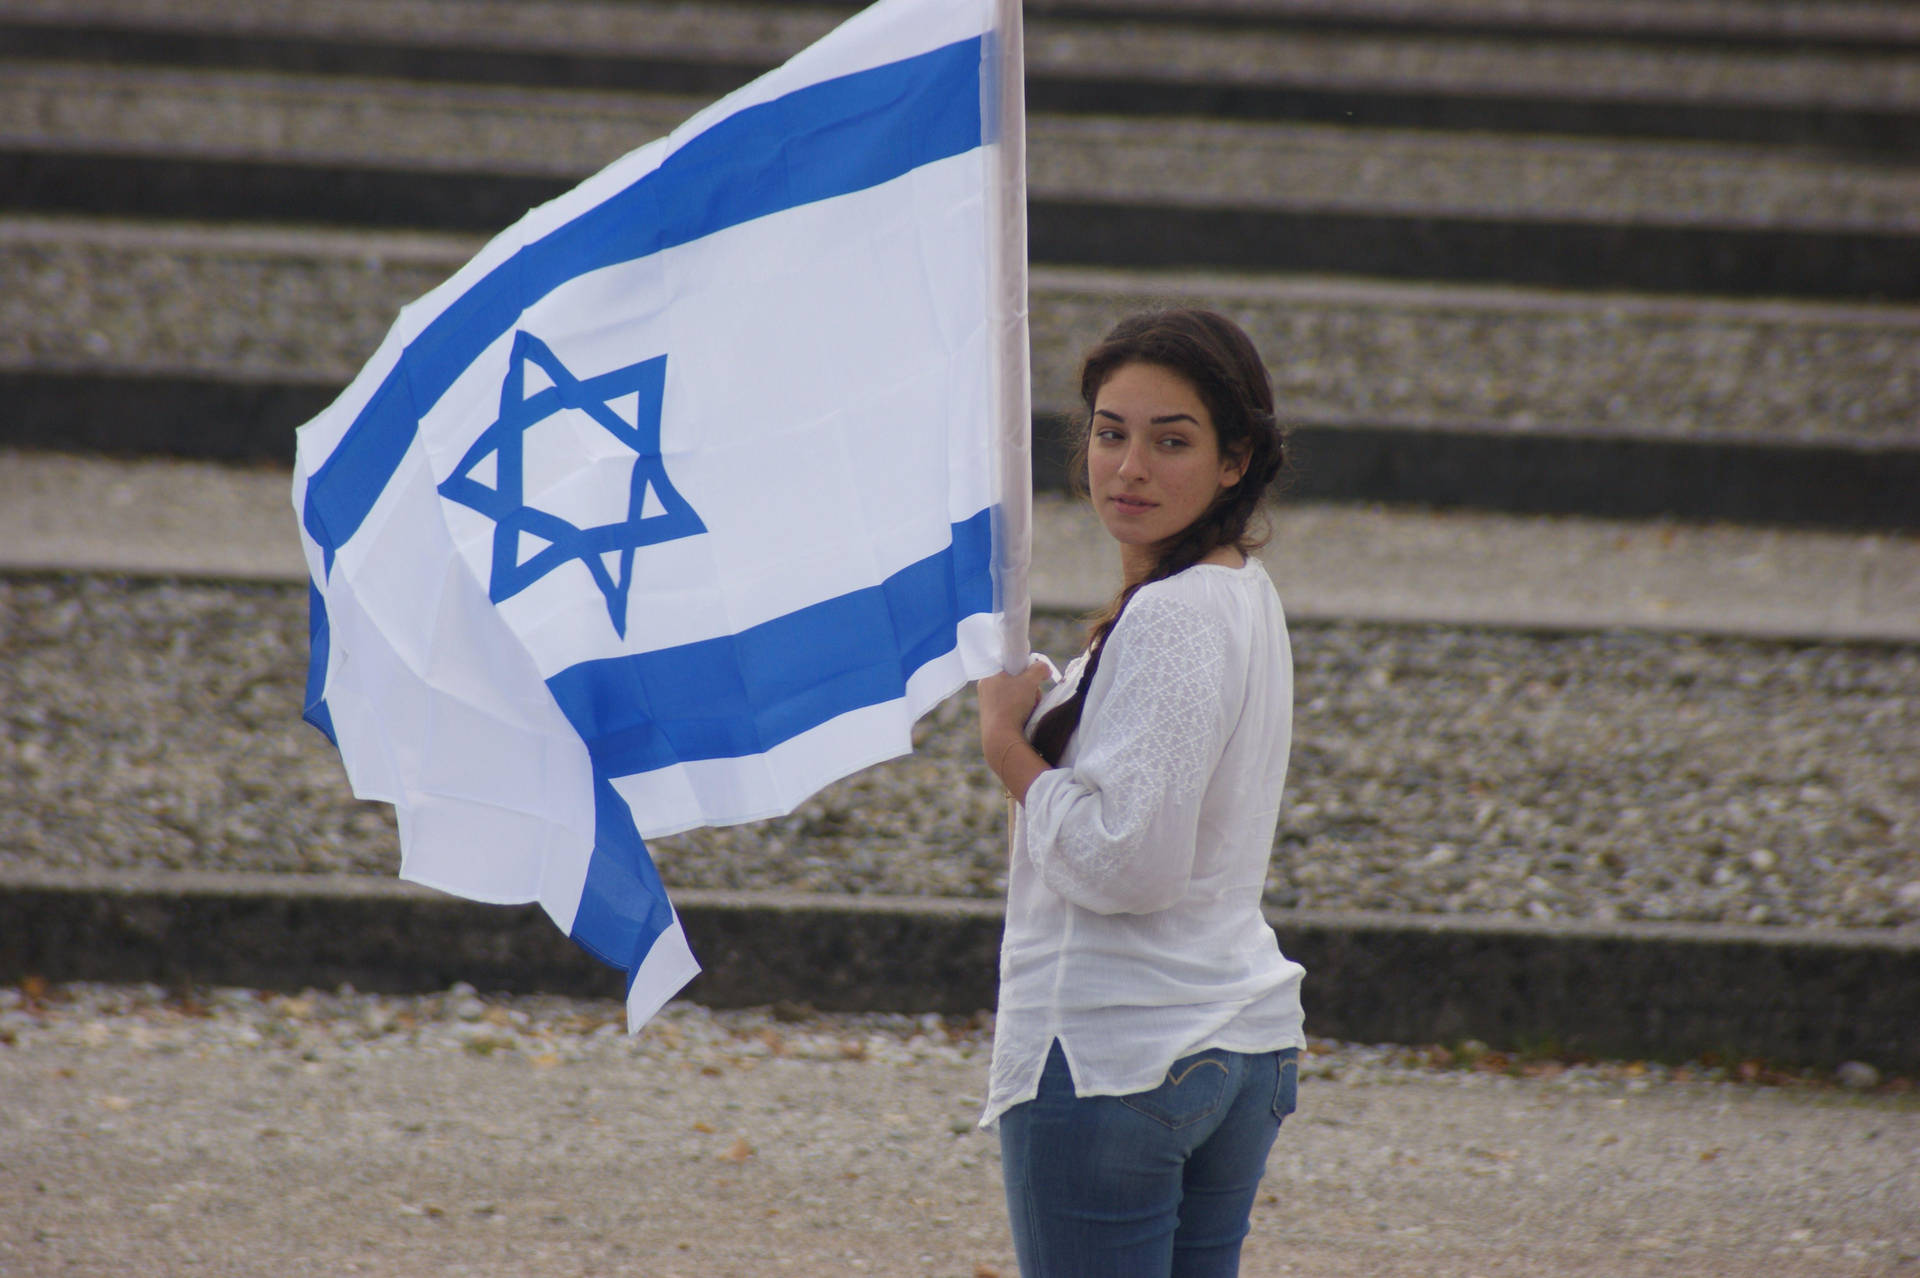 A patriotic display with an Israeli lady and the Israel flag. Wallpaper